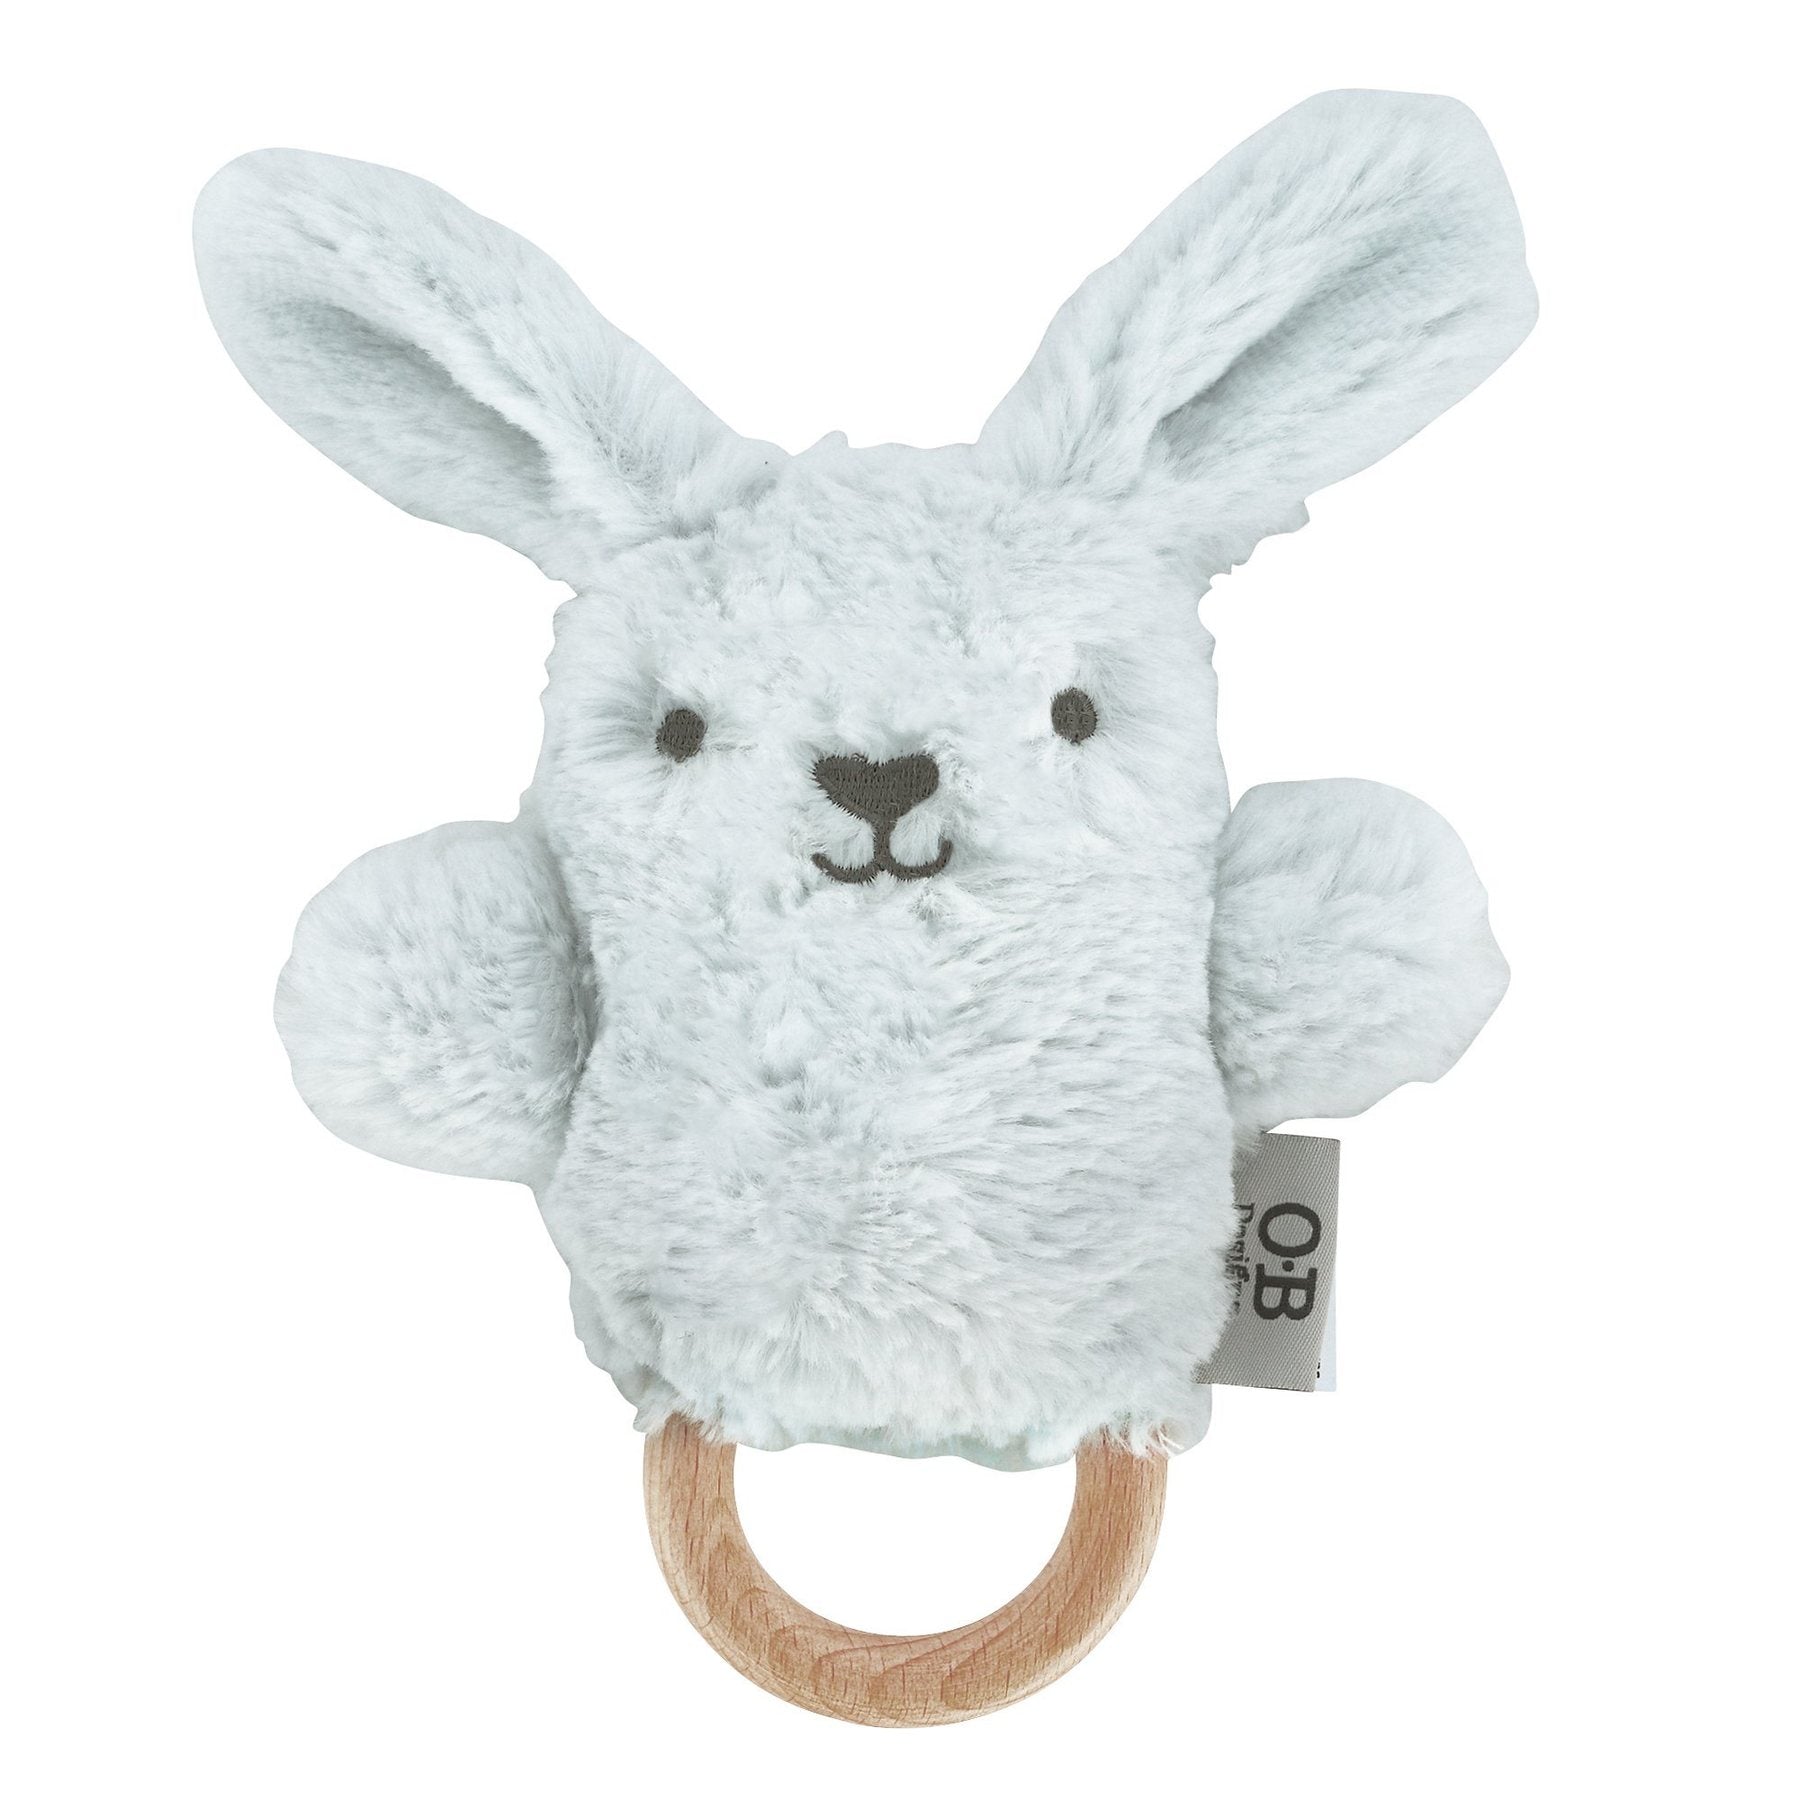 Baxter Bunny Wooden Teethe/Rattle - by OB Design